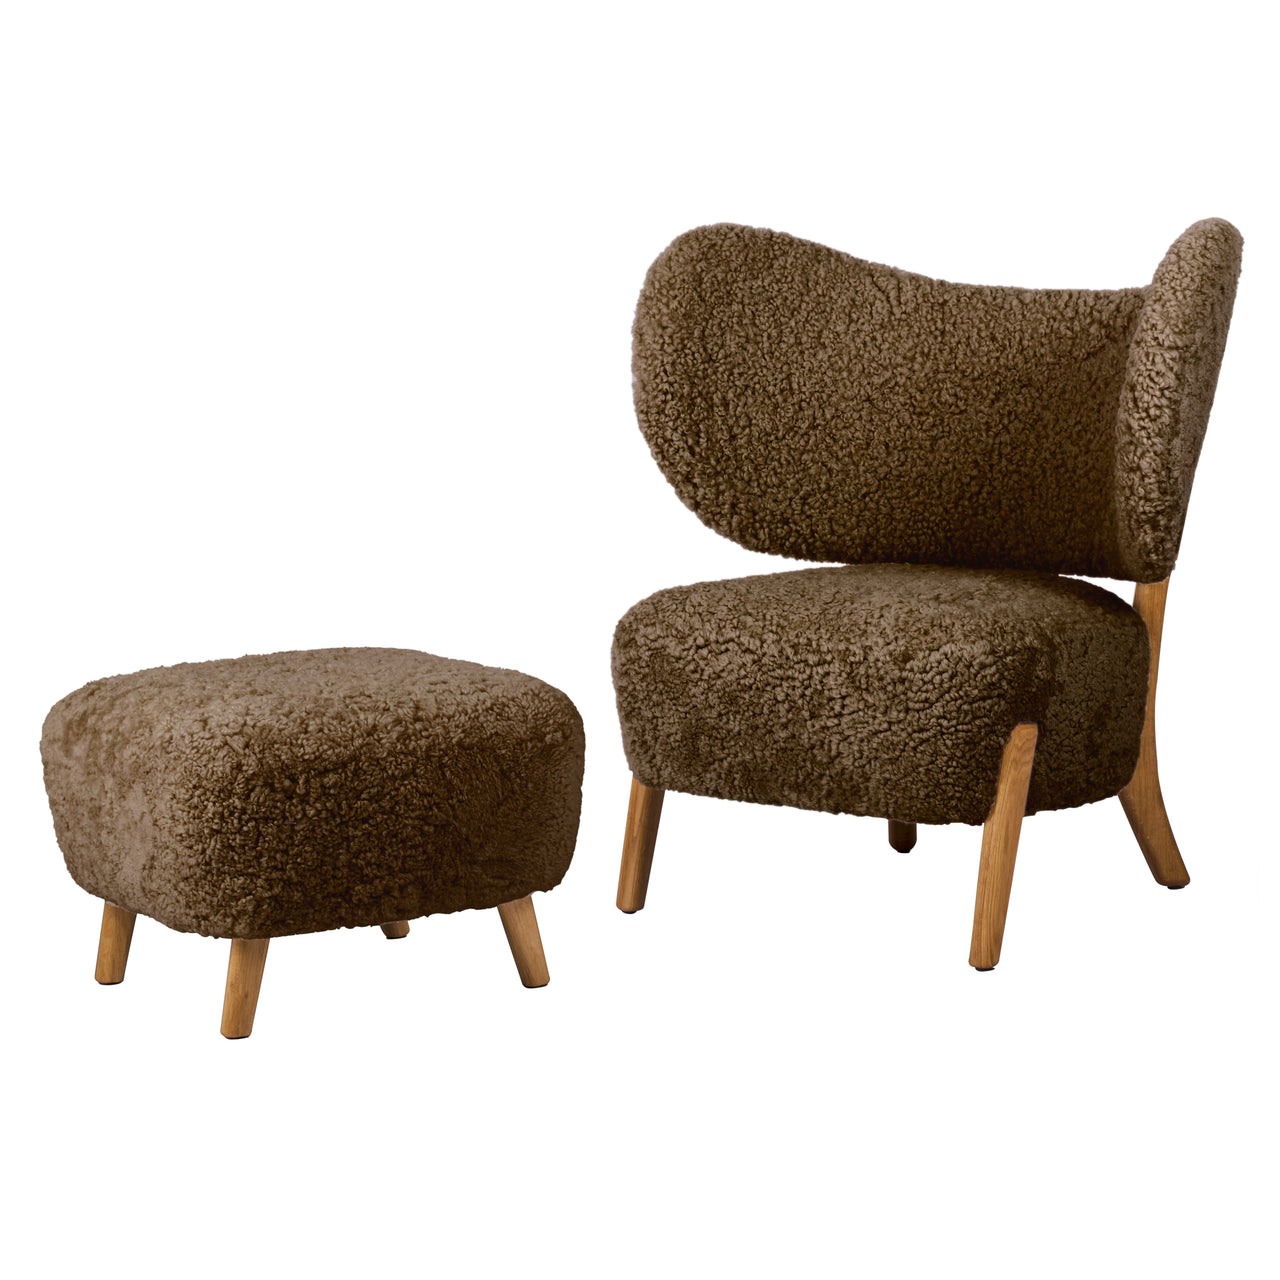 Tmbo Lounge Chair with Pouf: Natural Oiled Oak